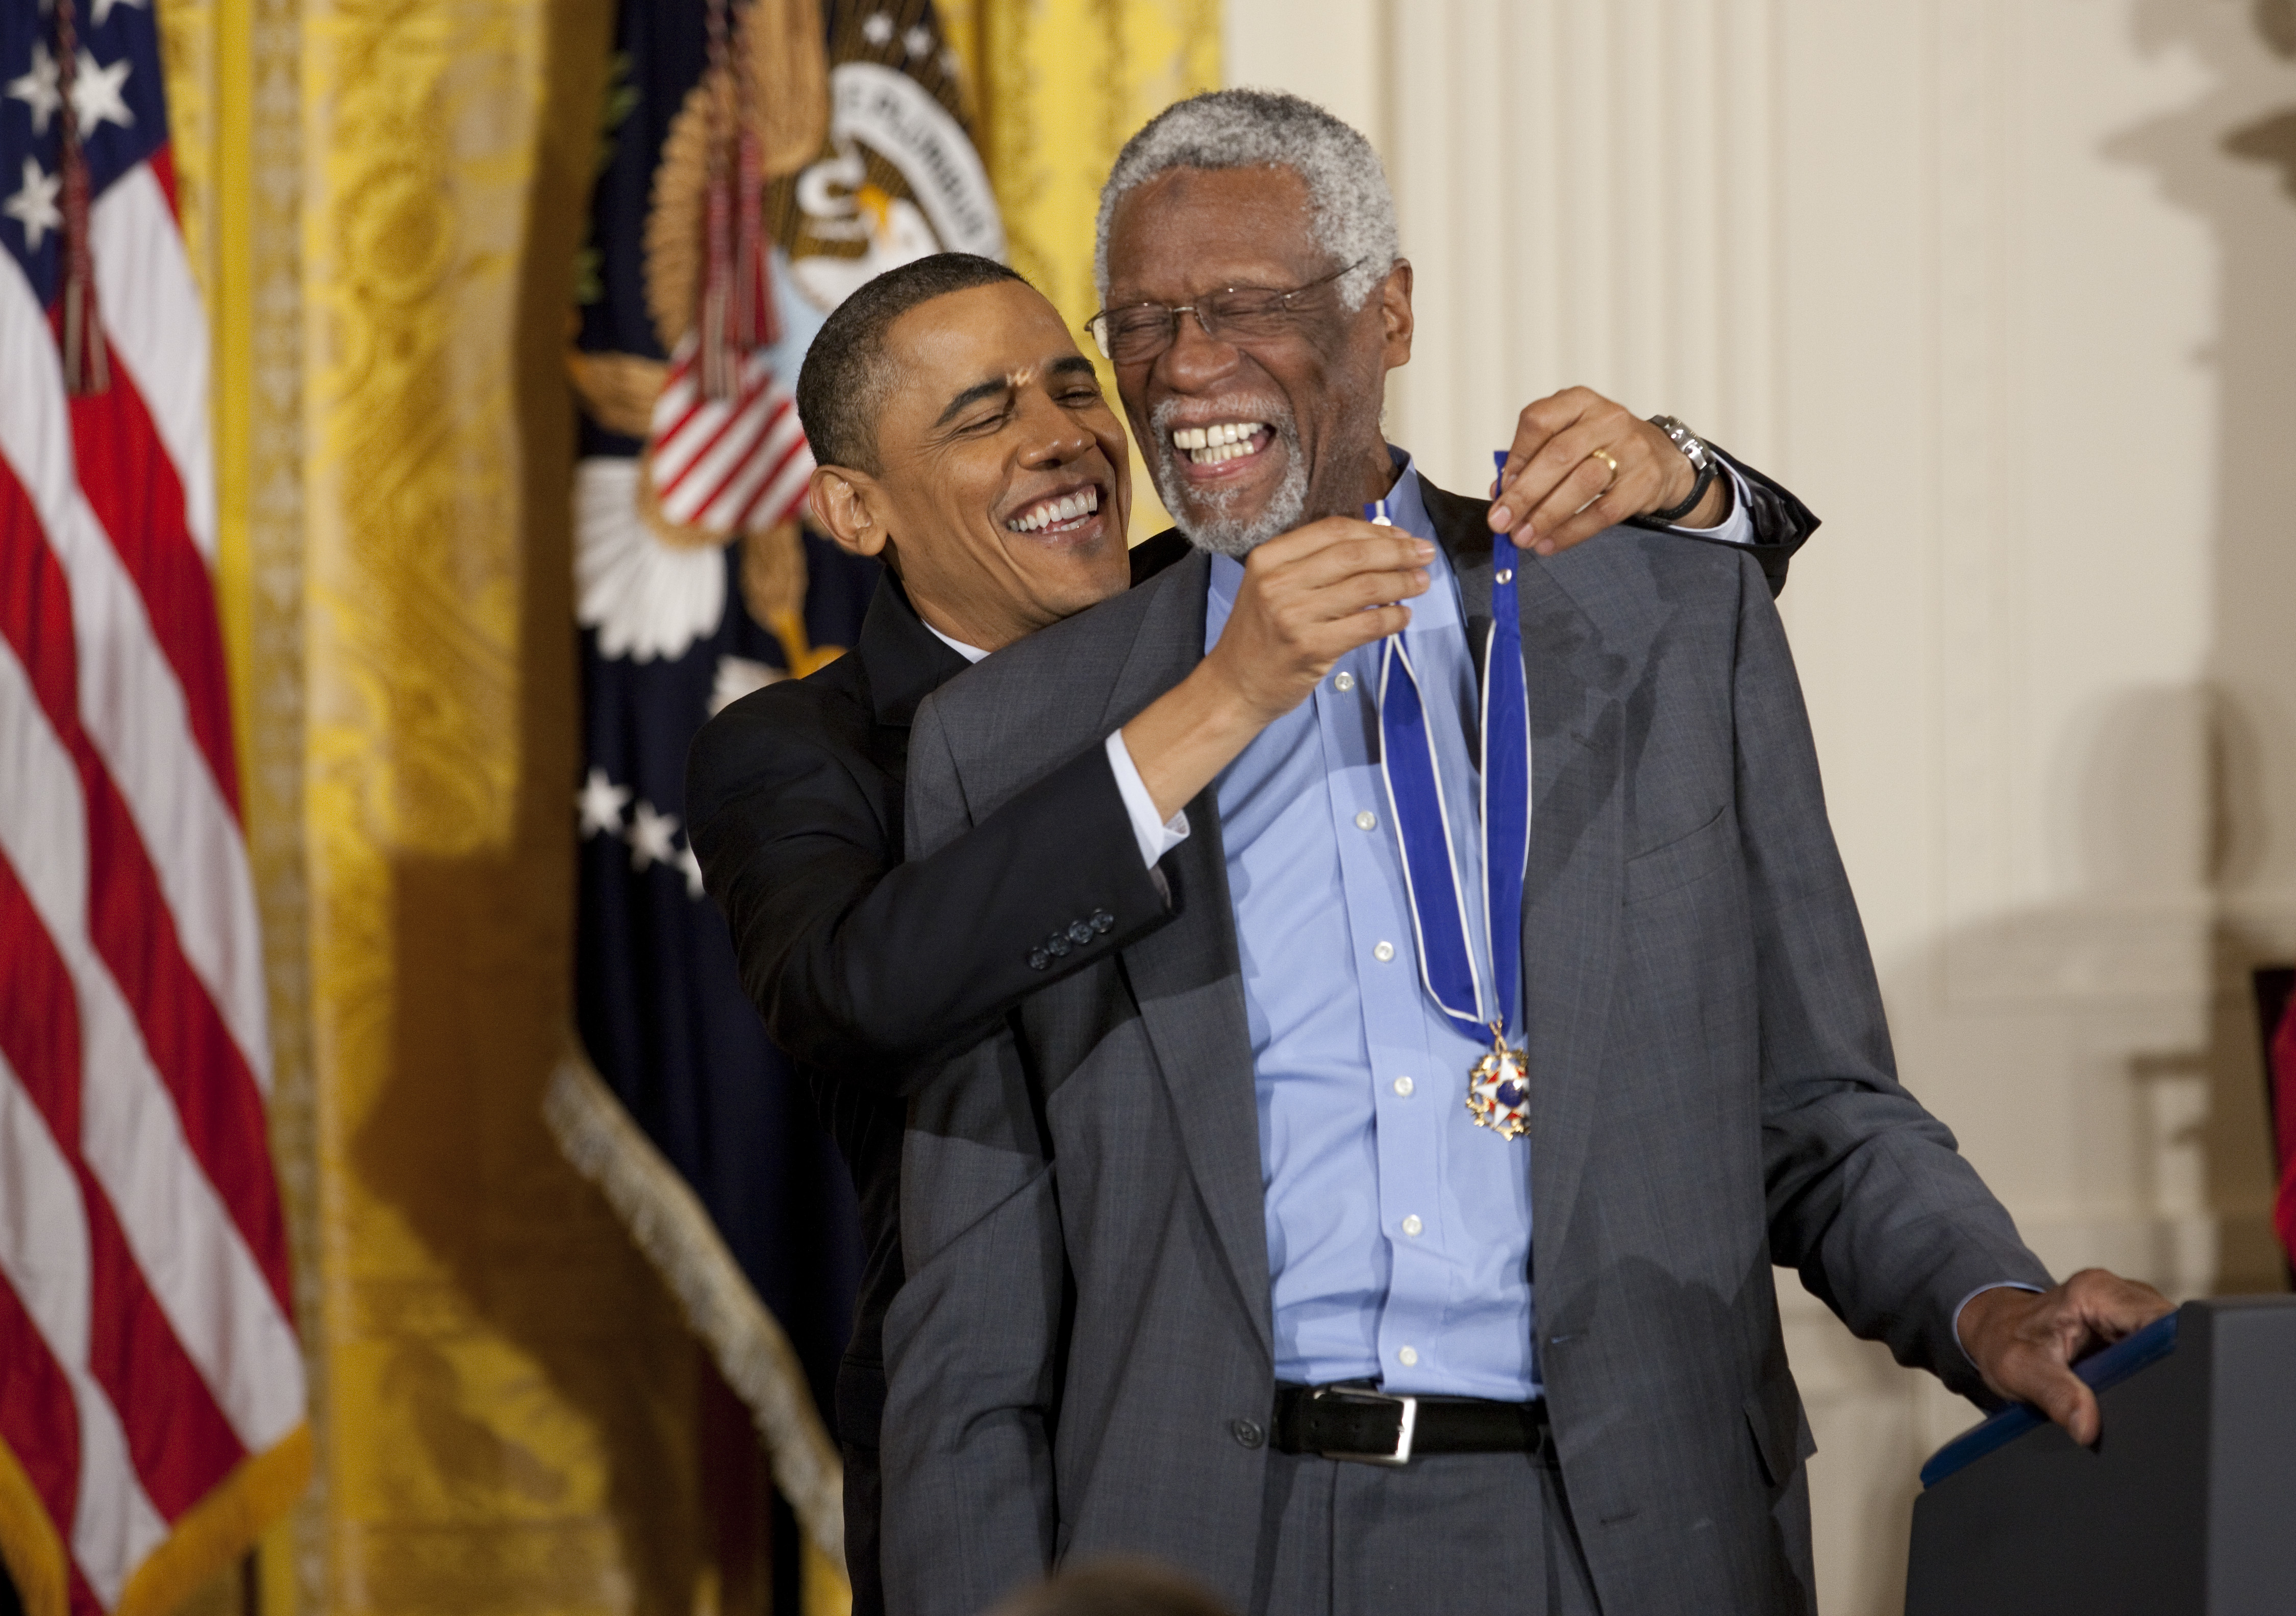 Bill Russell receives the Medal of Freedom from Barack Obama in 2011.